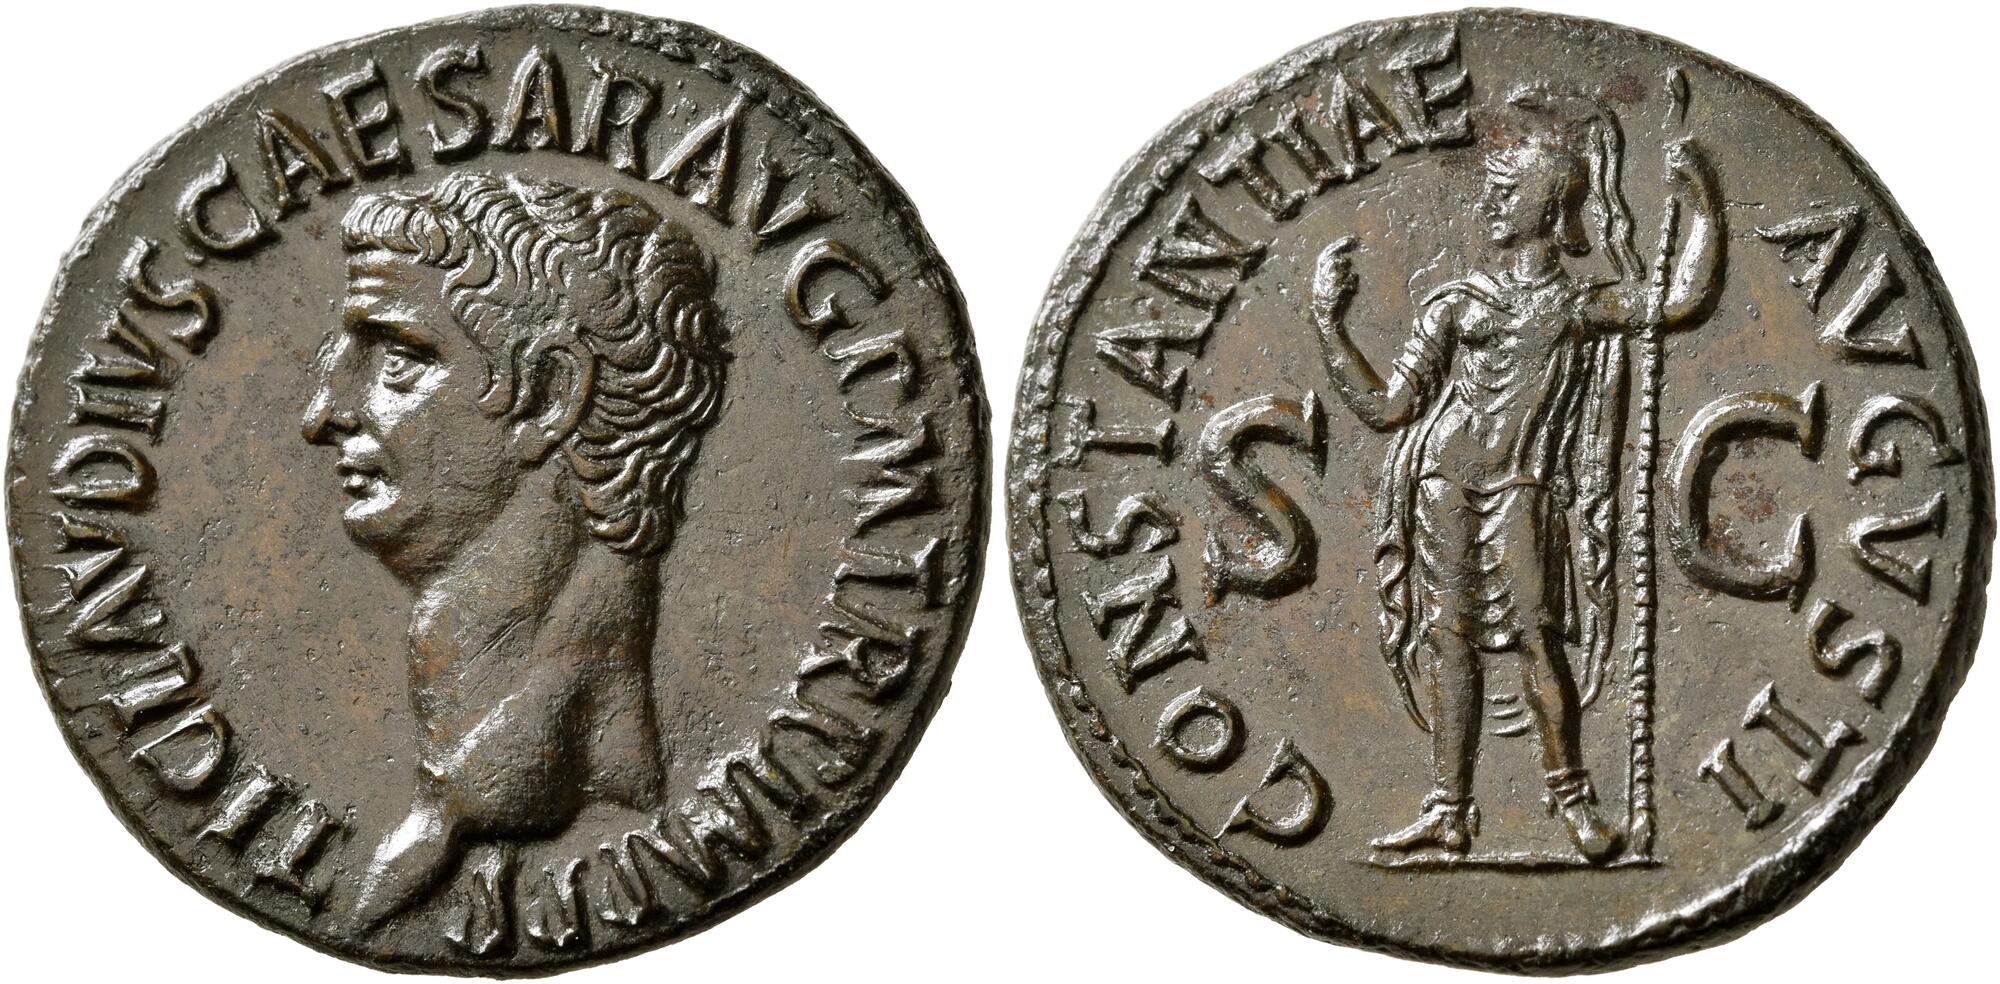 A Roman copper coin with the front and back side shown next to each other. On the left side, the head of Claudius. On the right, Constantia, helmeted and in military dress, standing front, head to left, raising her right hand and holding scepter in her left.